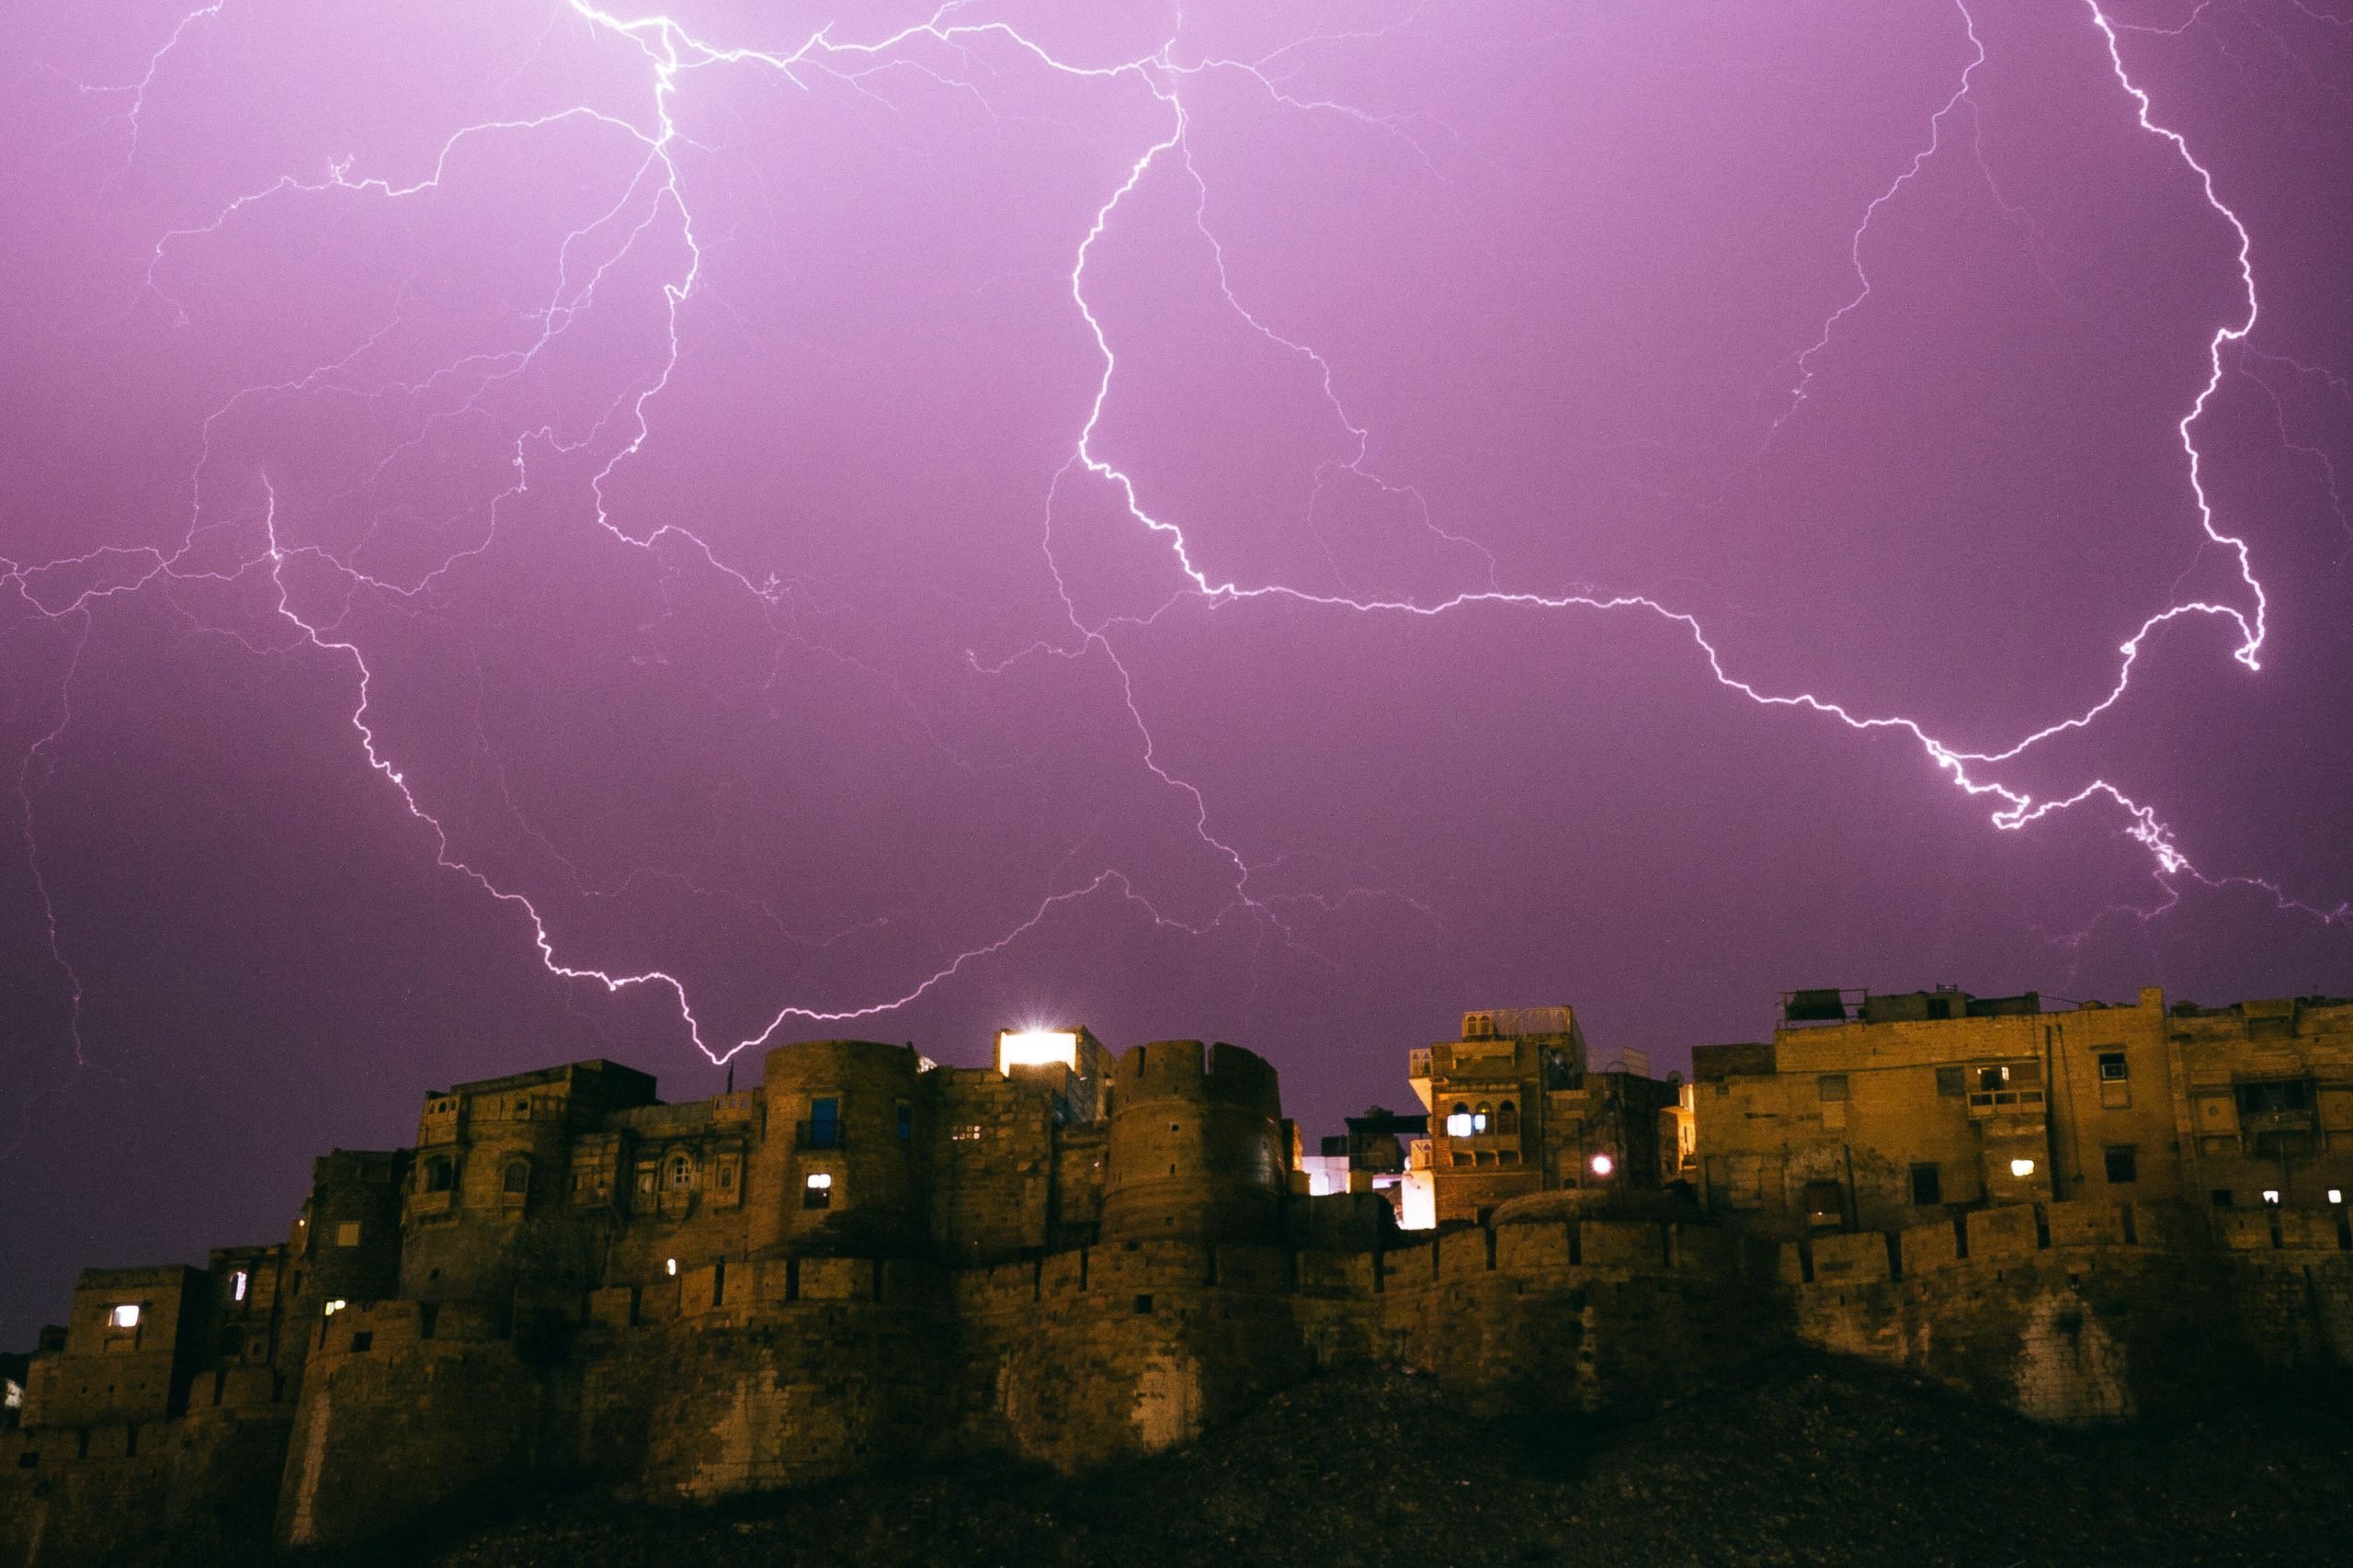 <p>Lightning strikes above the city of Jaisalmer in Rajasthan, India (Image: Alamy)</p>